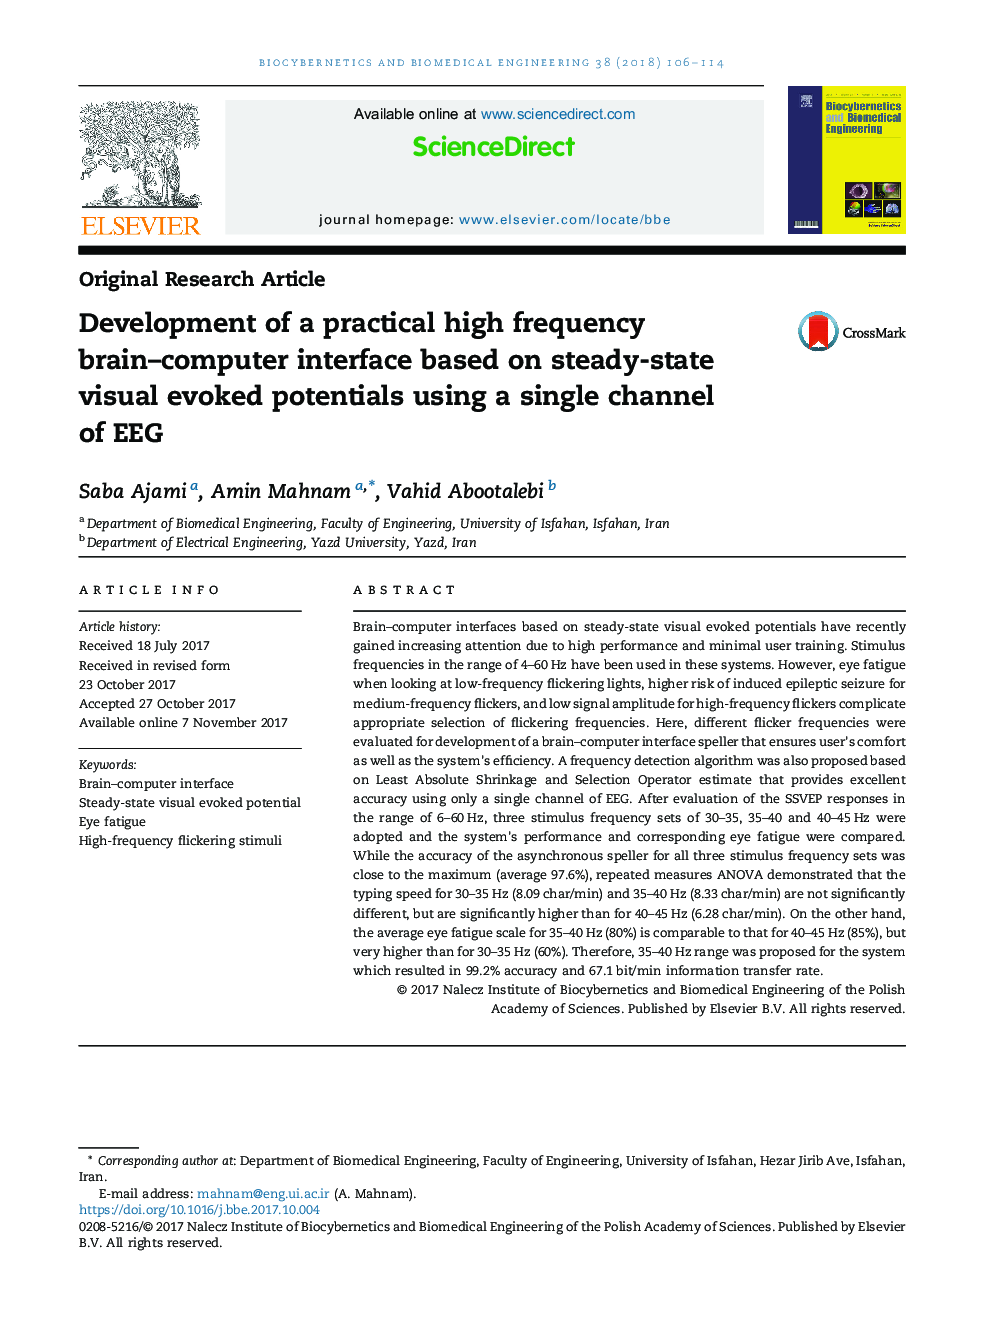 Development of a practical high frequency brain-computer interface based on steady-state visual evoked potentials using a single channel of EEG